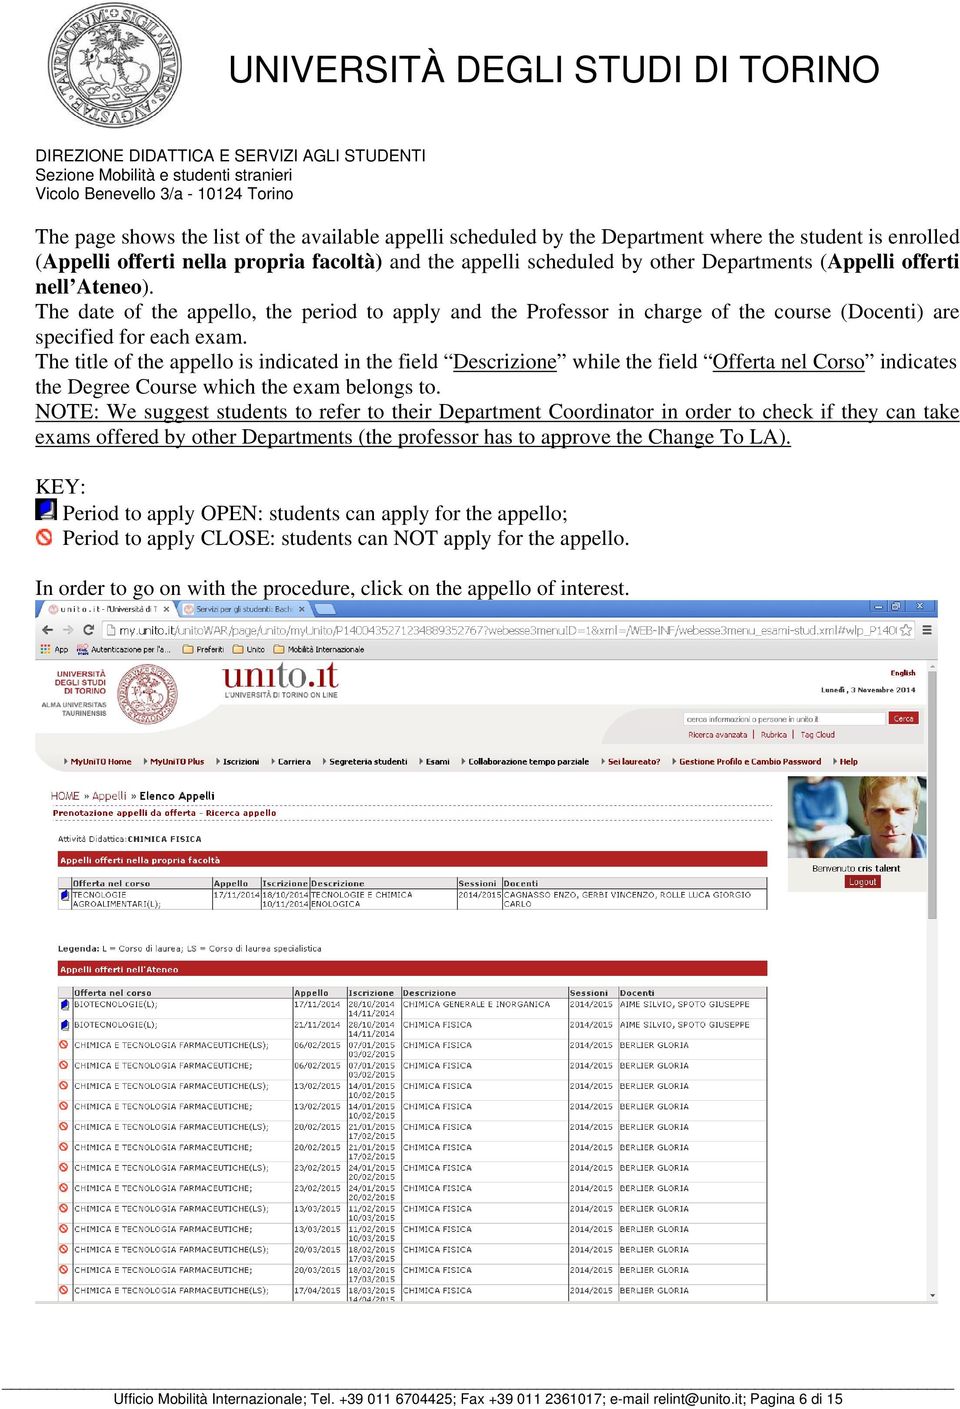 The title of the appello is indicated in the field Descrizione while the field Offerta nel Corso indicates the Degree Course which the exam belongs to.